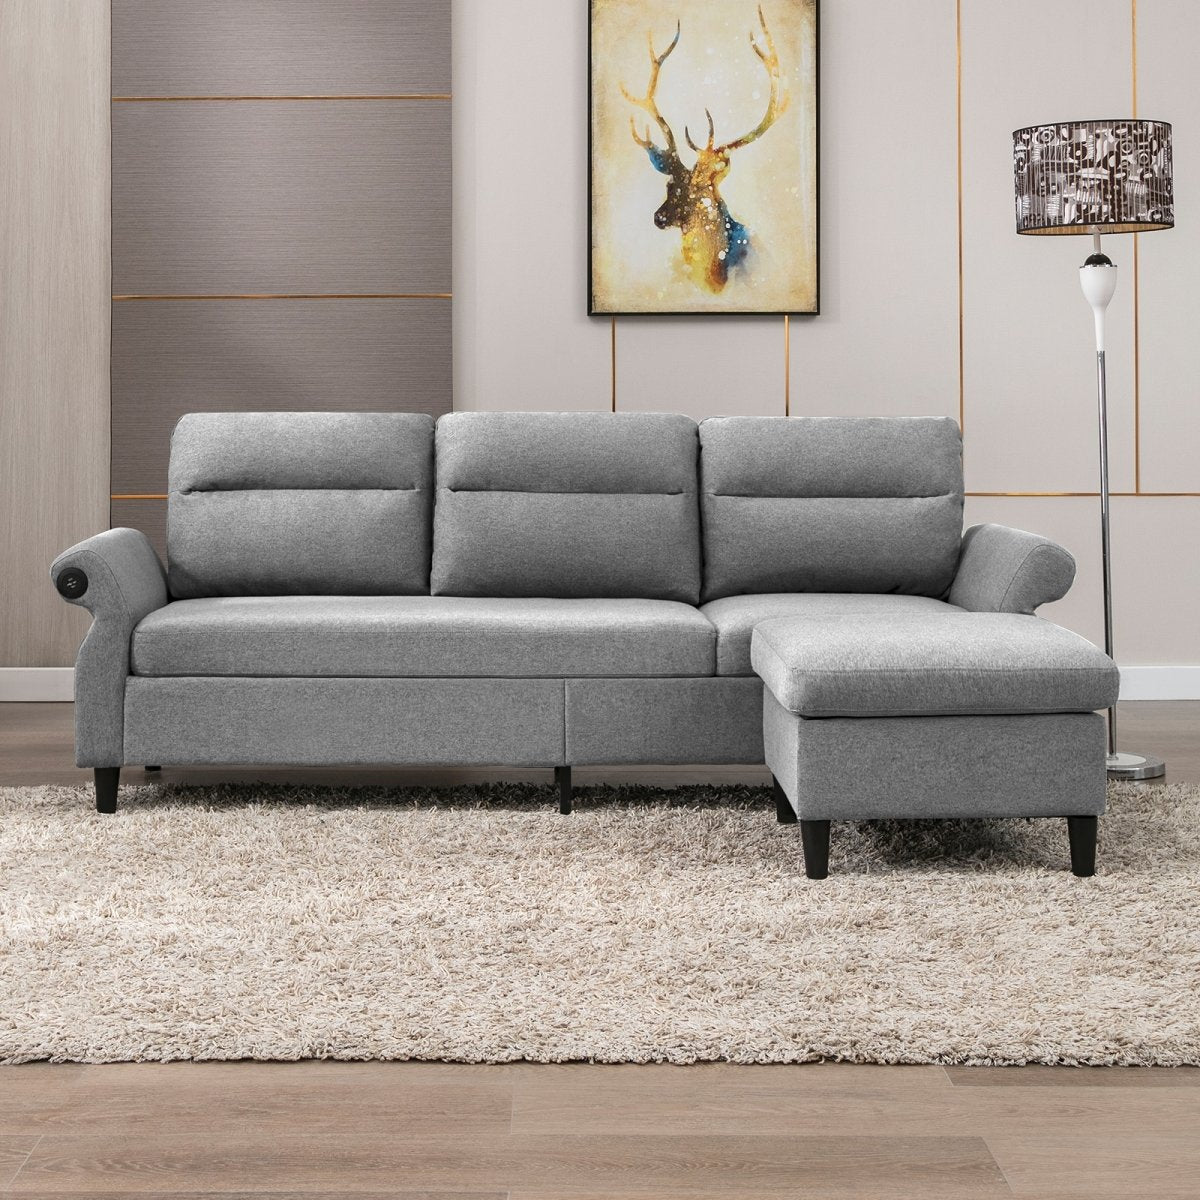 Convertible Sectional Sofa | 3 Seats Couch with USB Ports and Adjustable Armrest - Mjkonesectional sofa